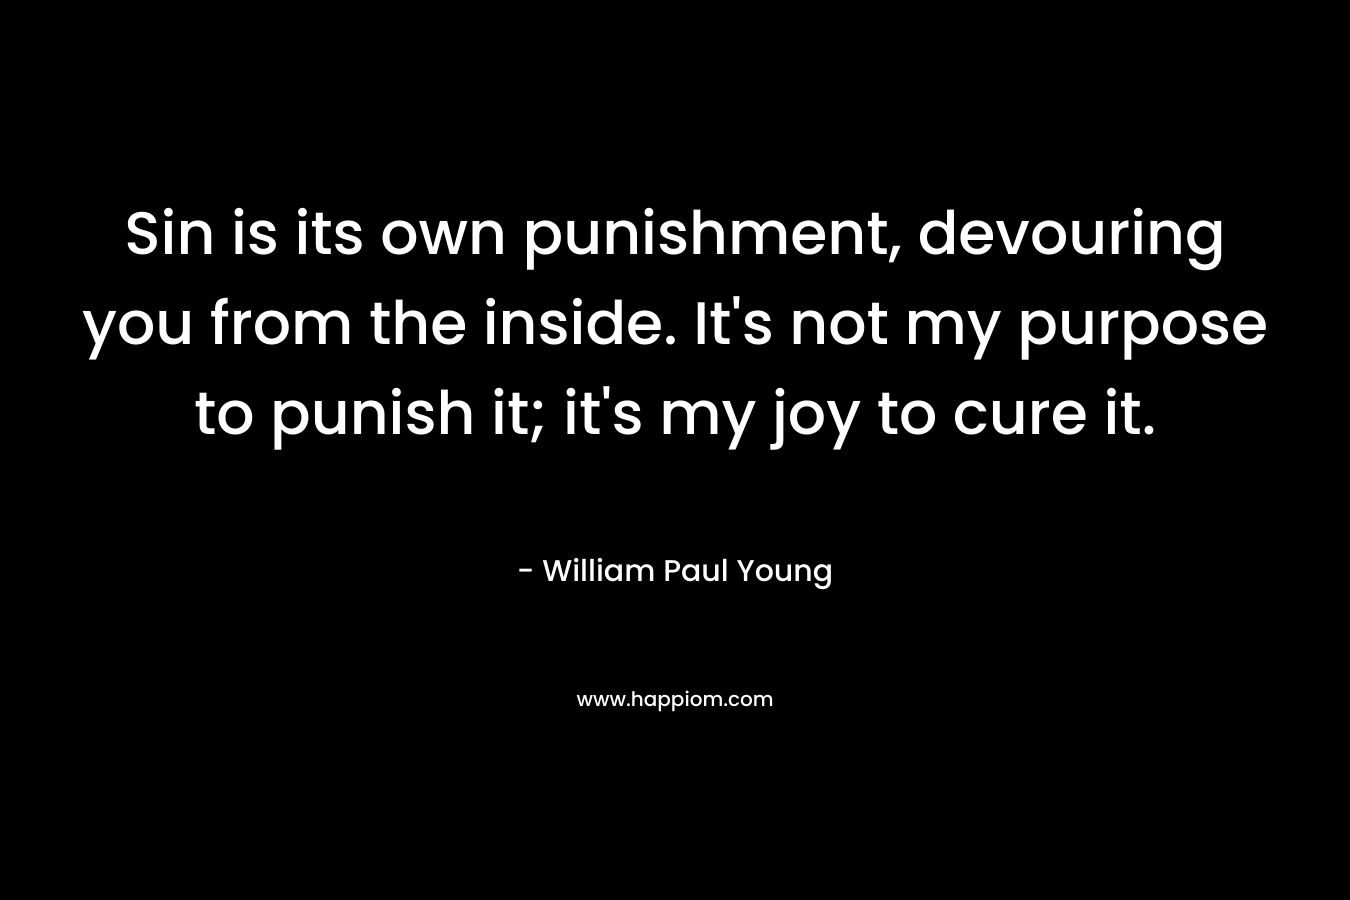 Sin is its own punishment, devouring you from the inside. It’s not my purpose to punish it; it’s my joy to cure it. – William Paul Young